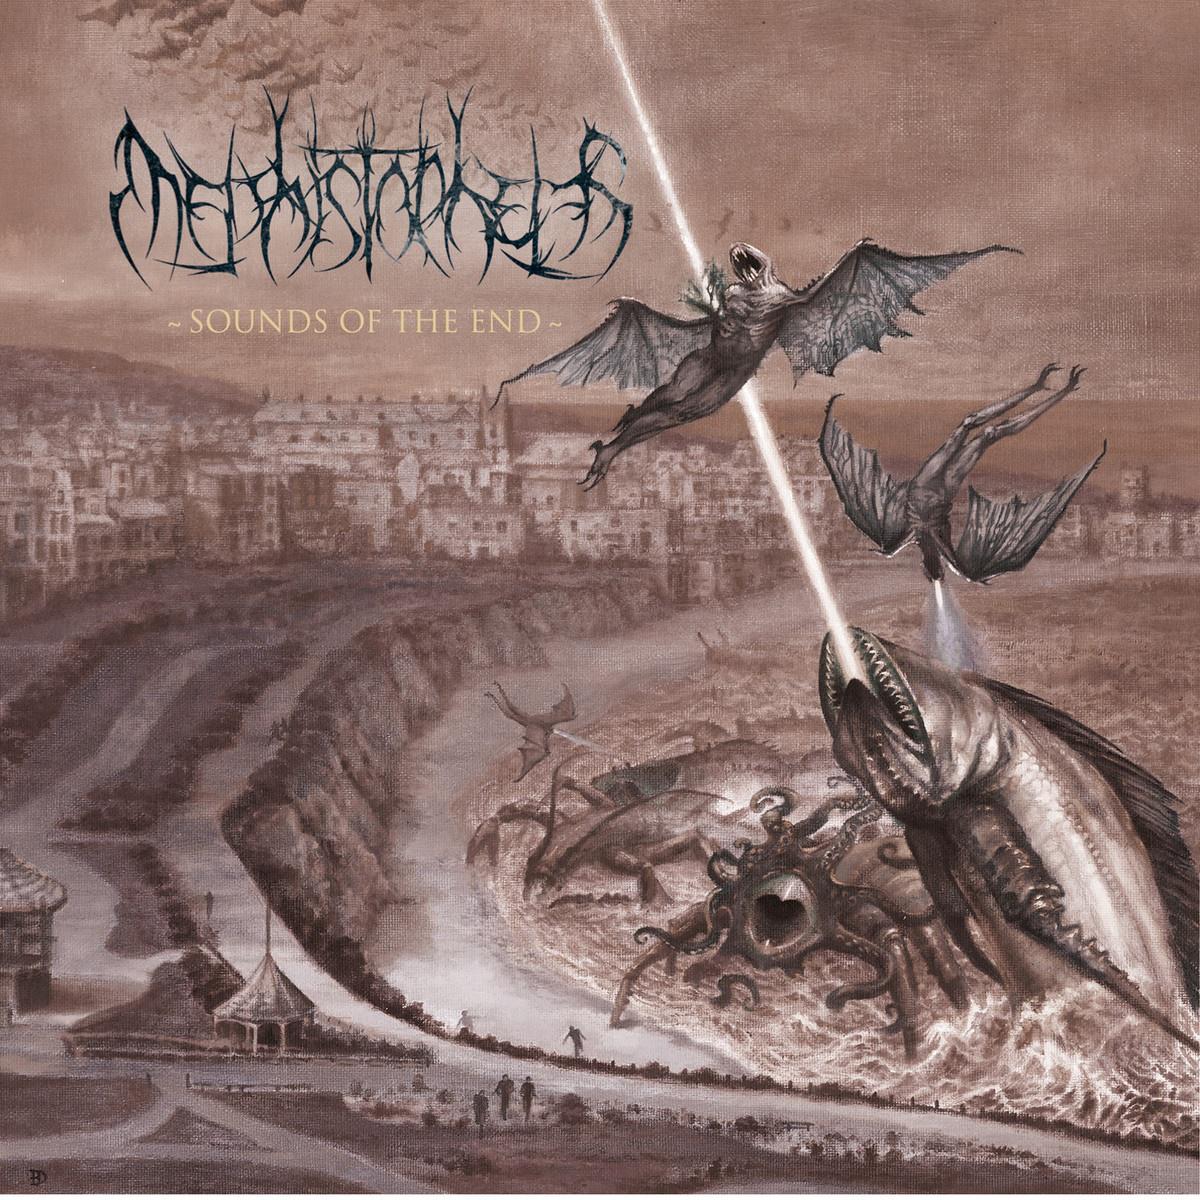 Mephistopheles - Battle of the Sea and Sky